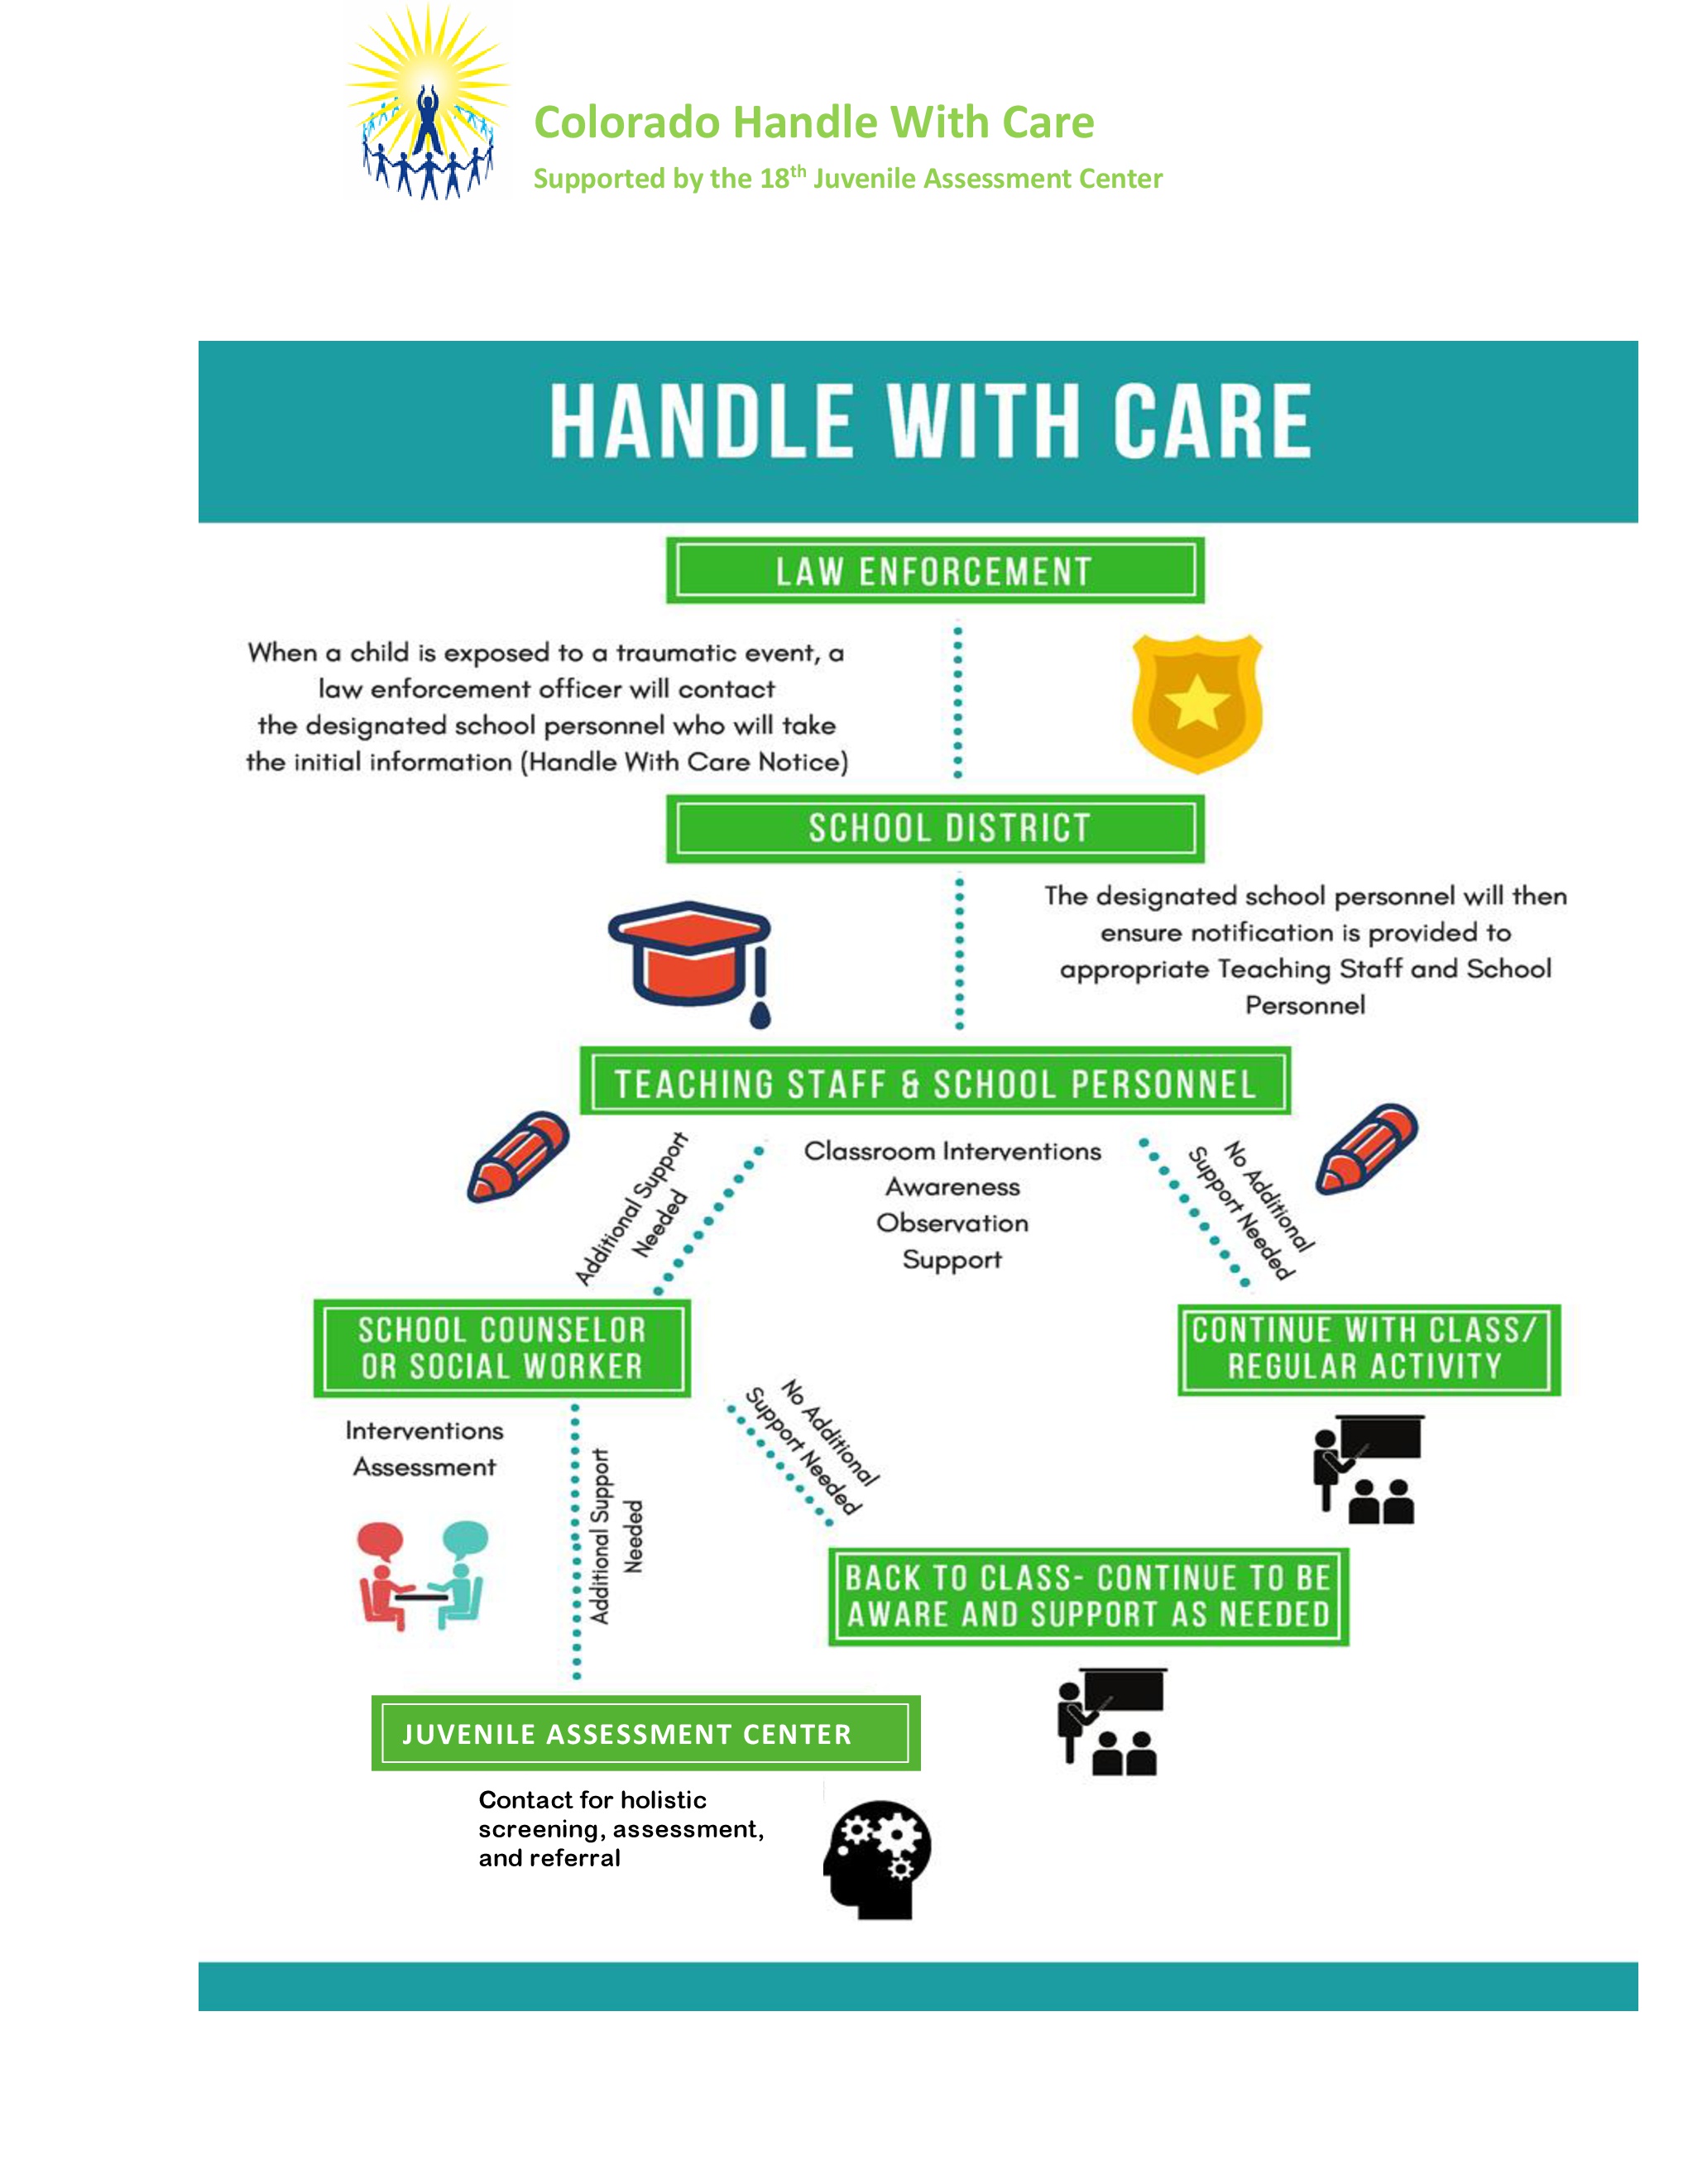 Handle With Care – The Juvenile Assessment Center